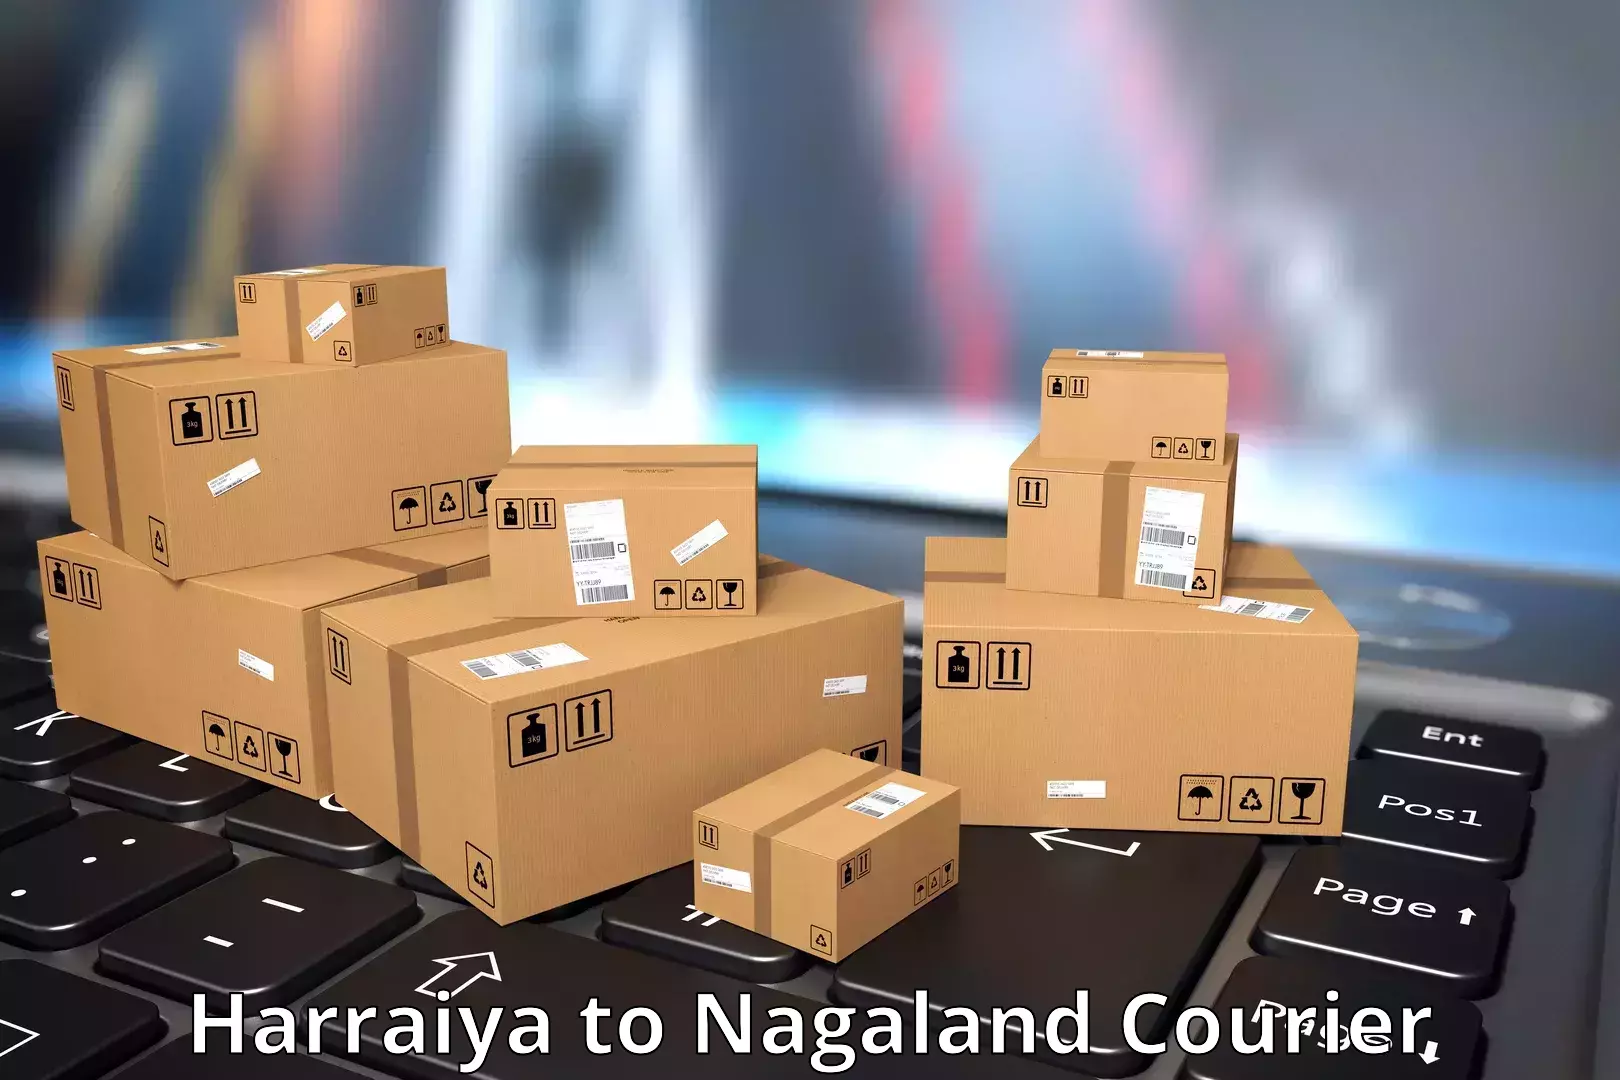 State-of-the-art courier technology Harraiya to Nagaland